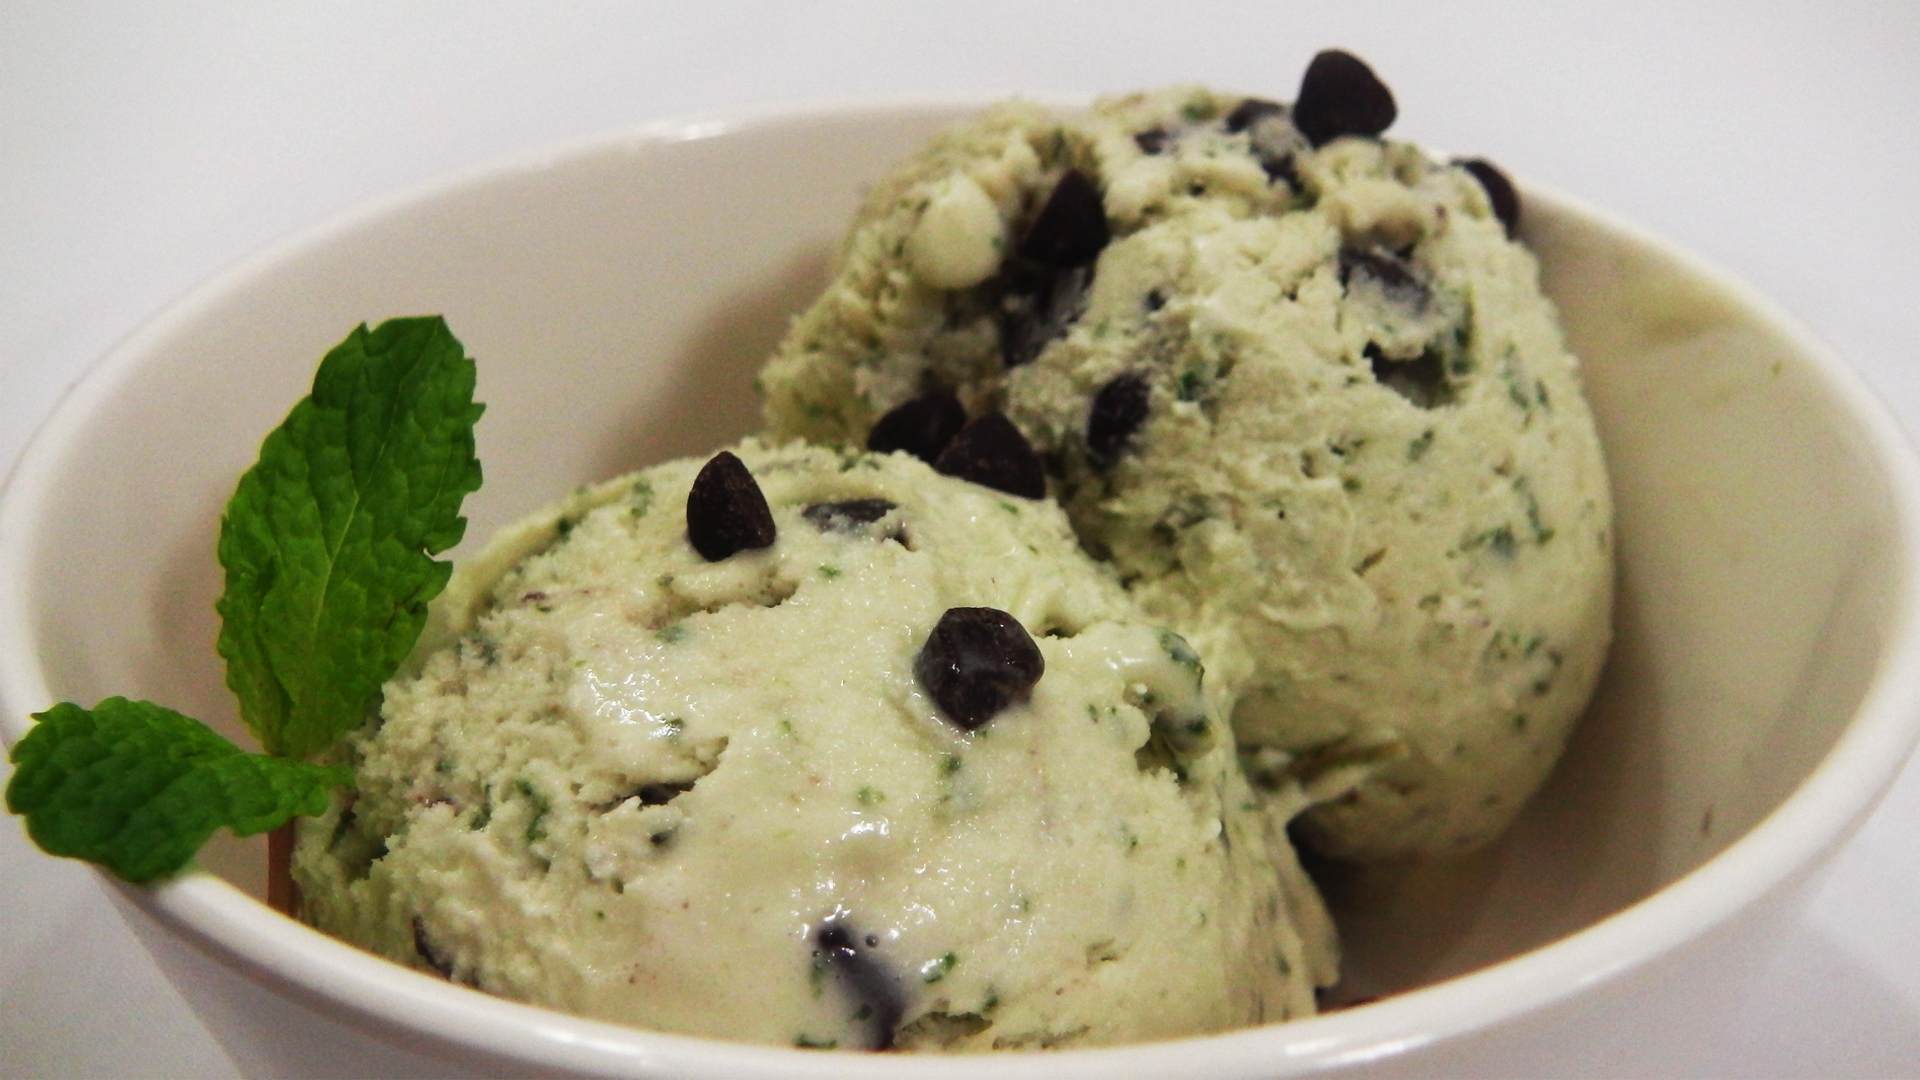 Mint Chocolate Ice Cream - Beat the Heat | Without Ice Cream Maker | Eggless - Foolproof Recipe